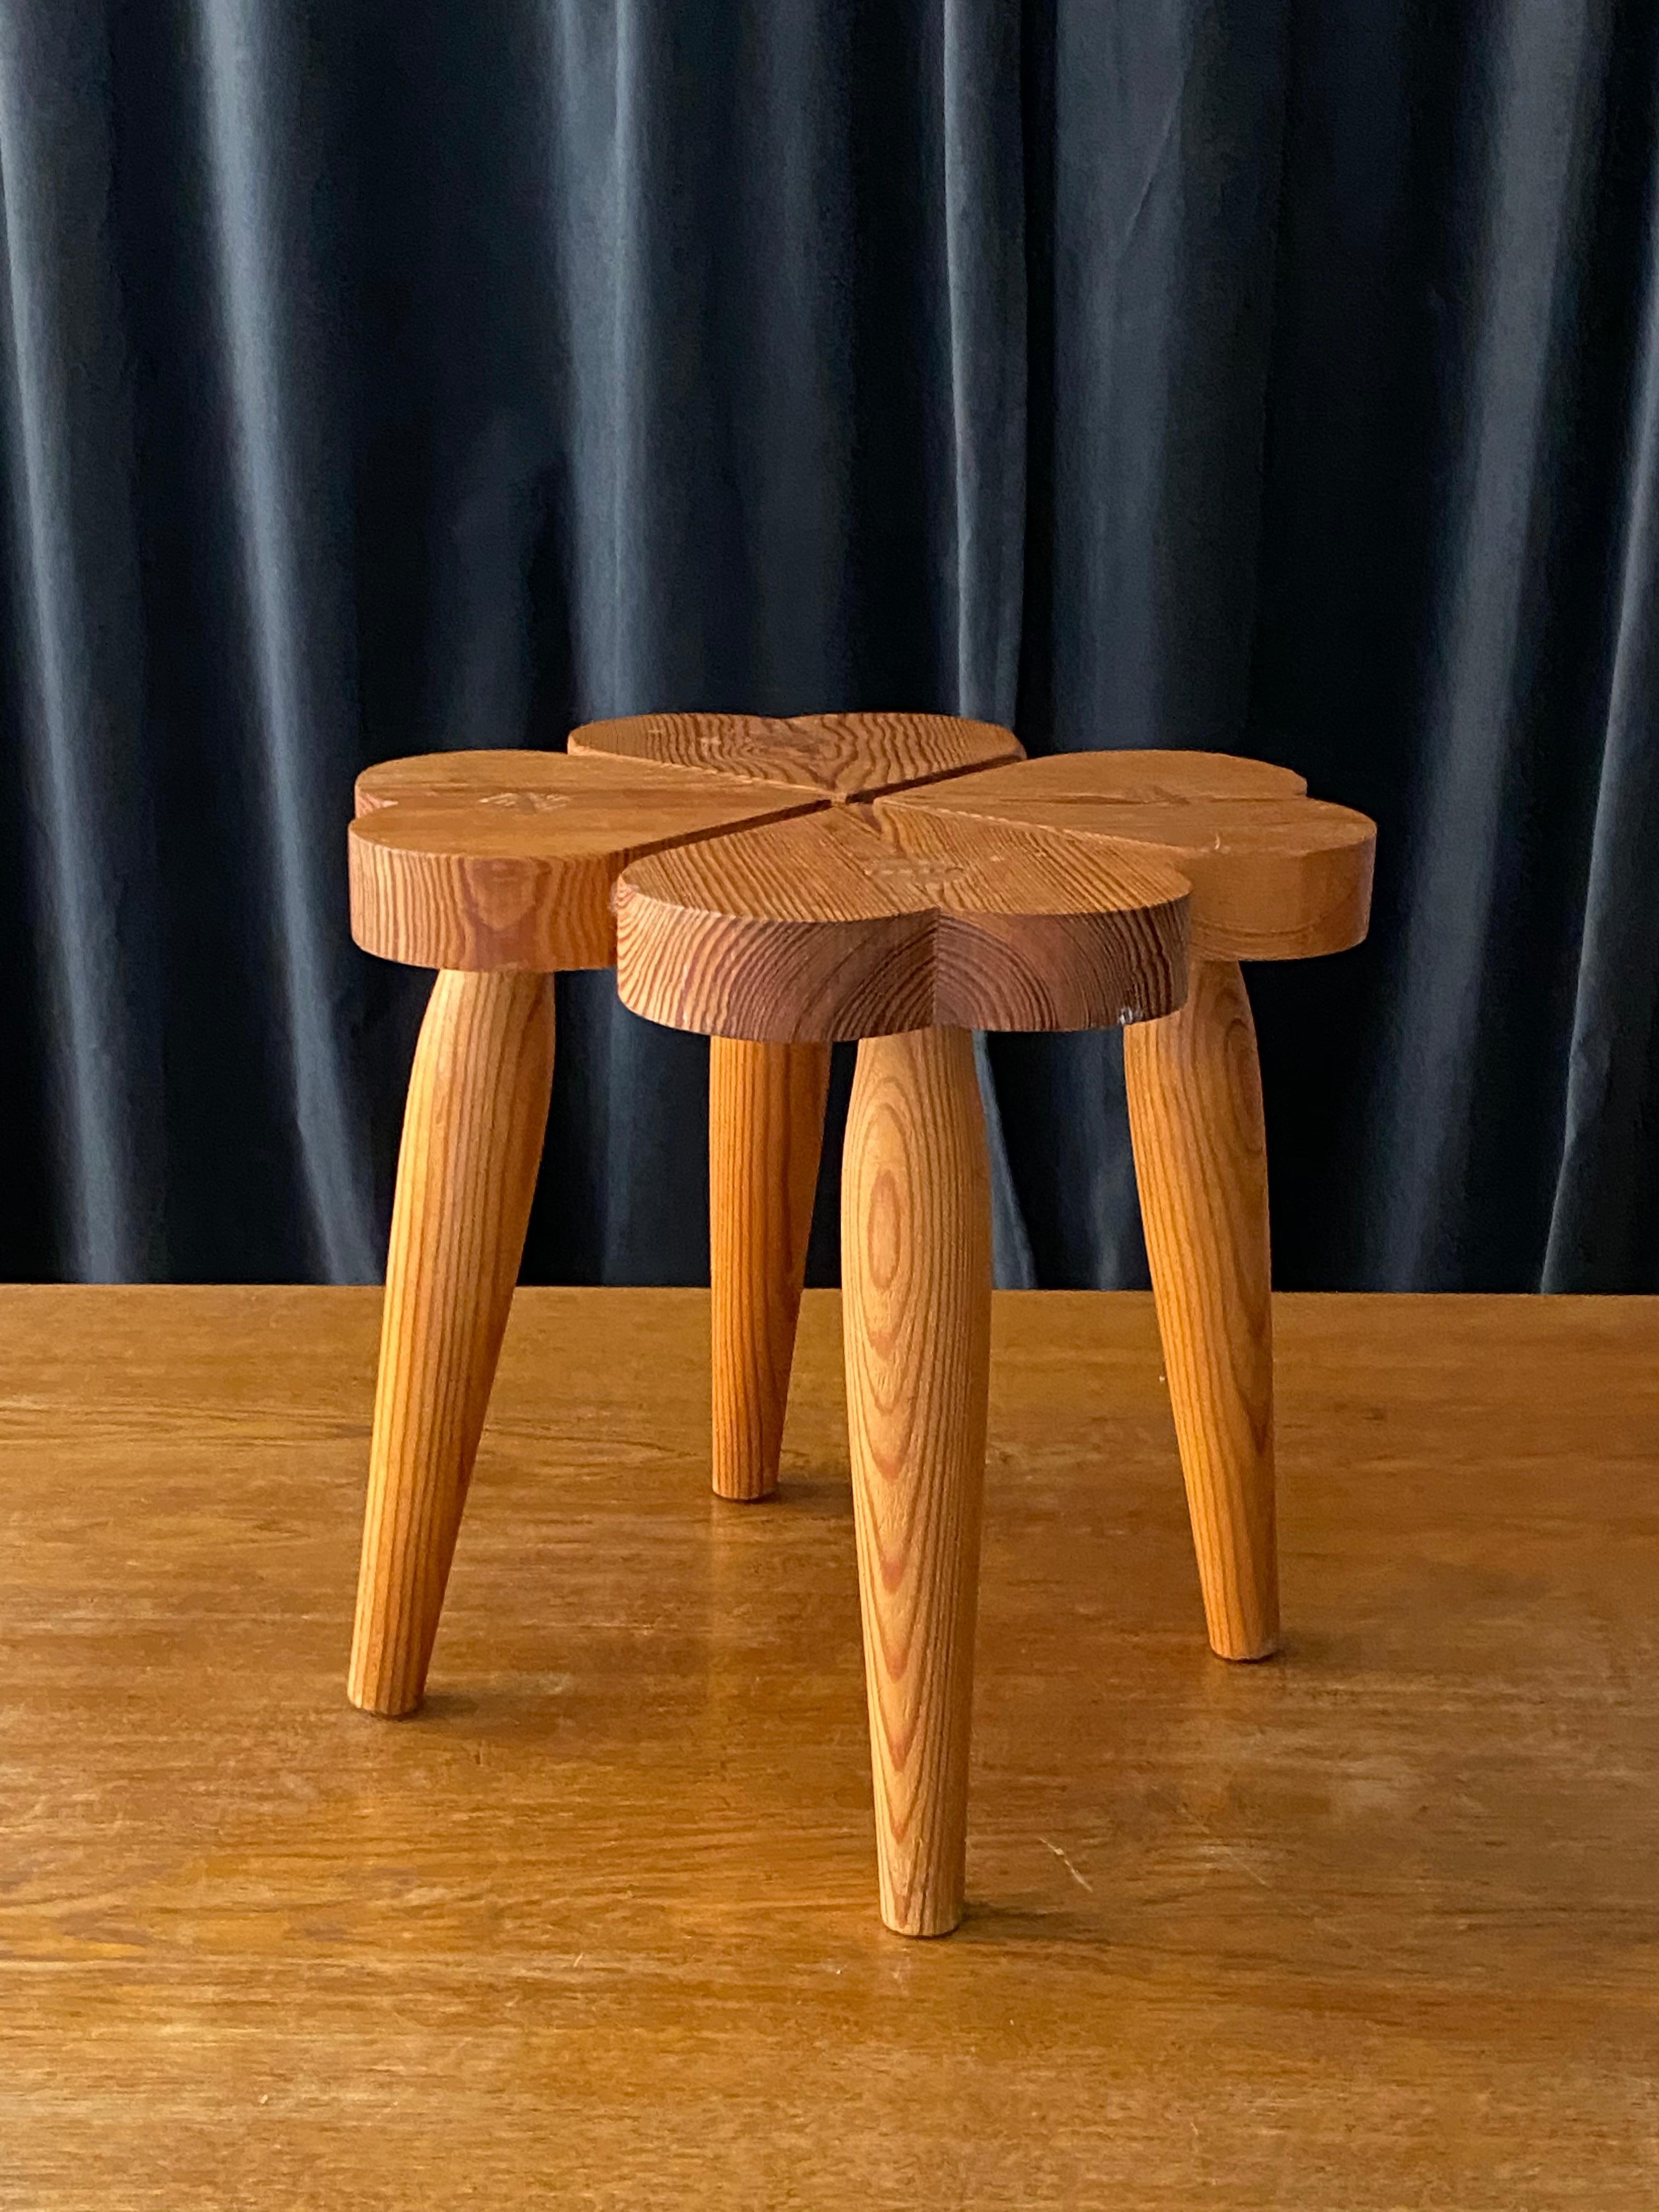 A modernist stool, by an unknown Swedish designer. In organically sculpted and joined solid pine. Produced in Sweden, circa 1960s.

Other designers of the period include Axel Einar Hjorth, Lisa Johansson-Pape, Pierre Chapo, and Charlotte Perriand.